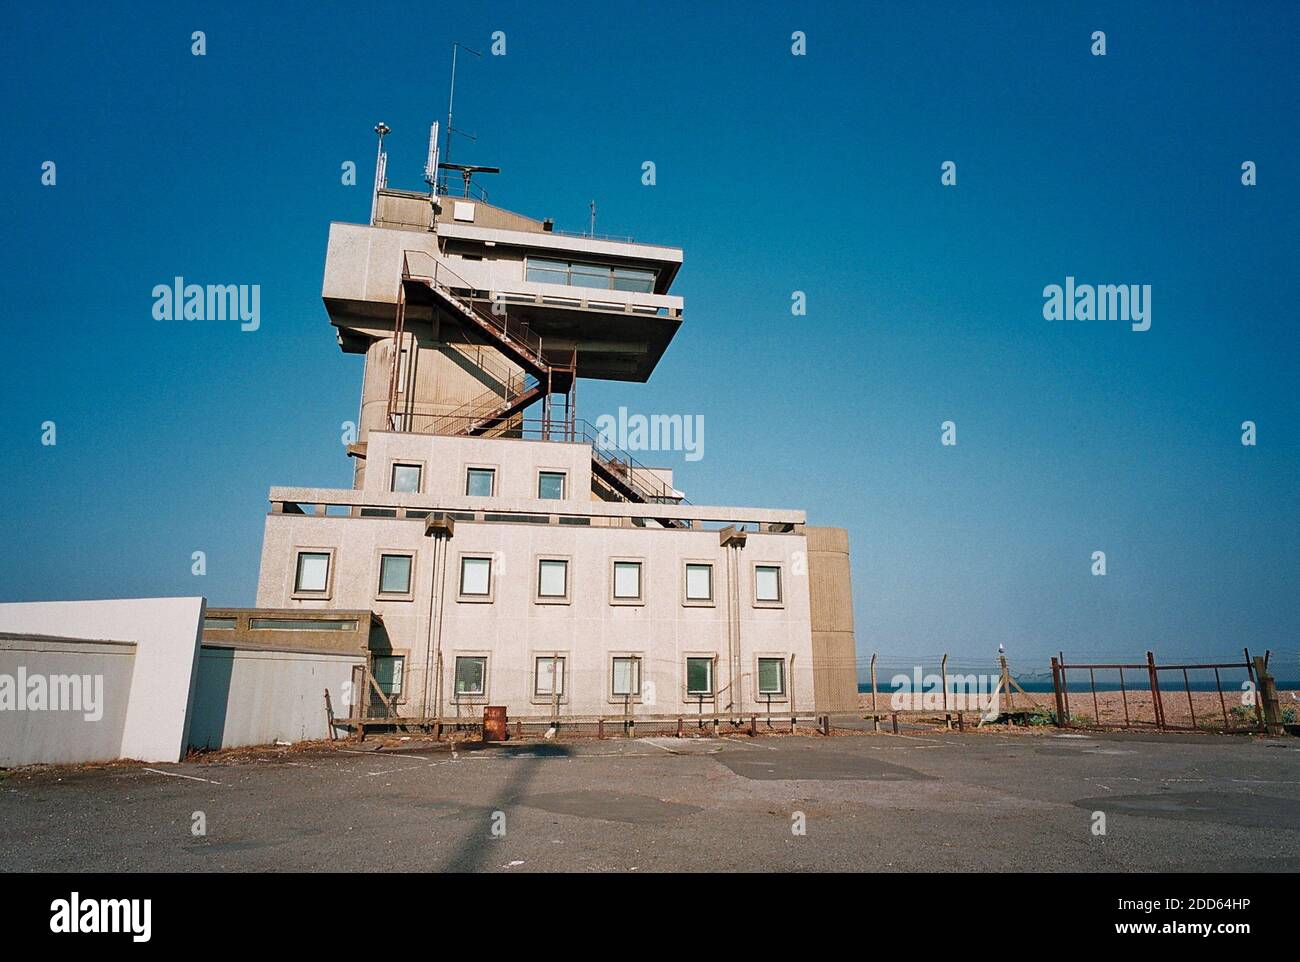 AJAXNETPHOTO. JULY, 2001. FOLKESTONE, ENGLAND. - WATCHTOWER - THE TRINITY HOUSE PILOT CONTROL TOWER OPENED IN 1971;DEMOLISHED IN 2014 TO MAKE WAY FOR NEW SEA-FRONT DEVLOPMENT. ICONIC TOWER SERVED LONDON, MEDWAY AND CINQUE PORTS SHIP PILOT SRVICE. DESIGNED BY JOHN HILL AND ANDREWS KENT & STONE.PHOTO:JONATHAN EASTLAND/AJAX REF:4301 18 14 Stock Photo